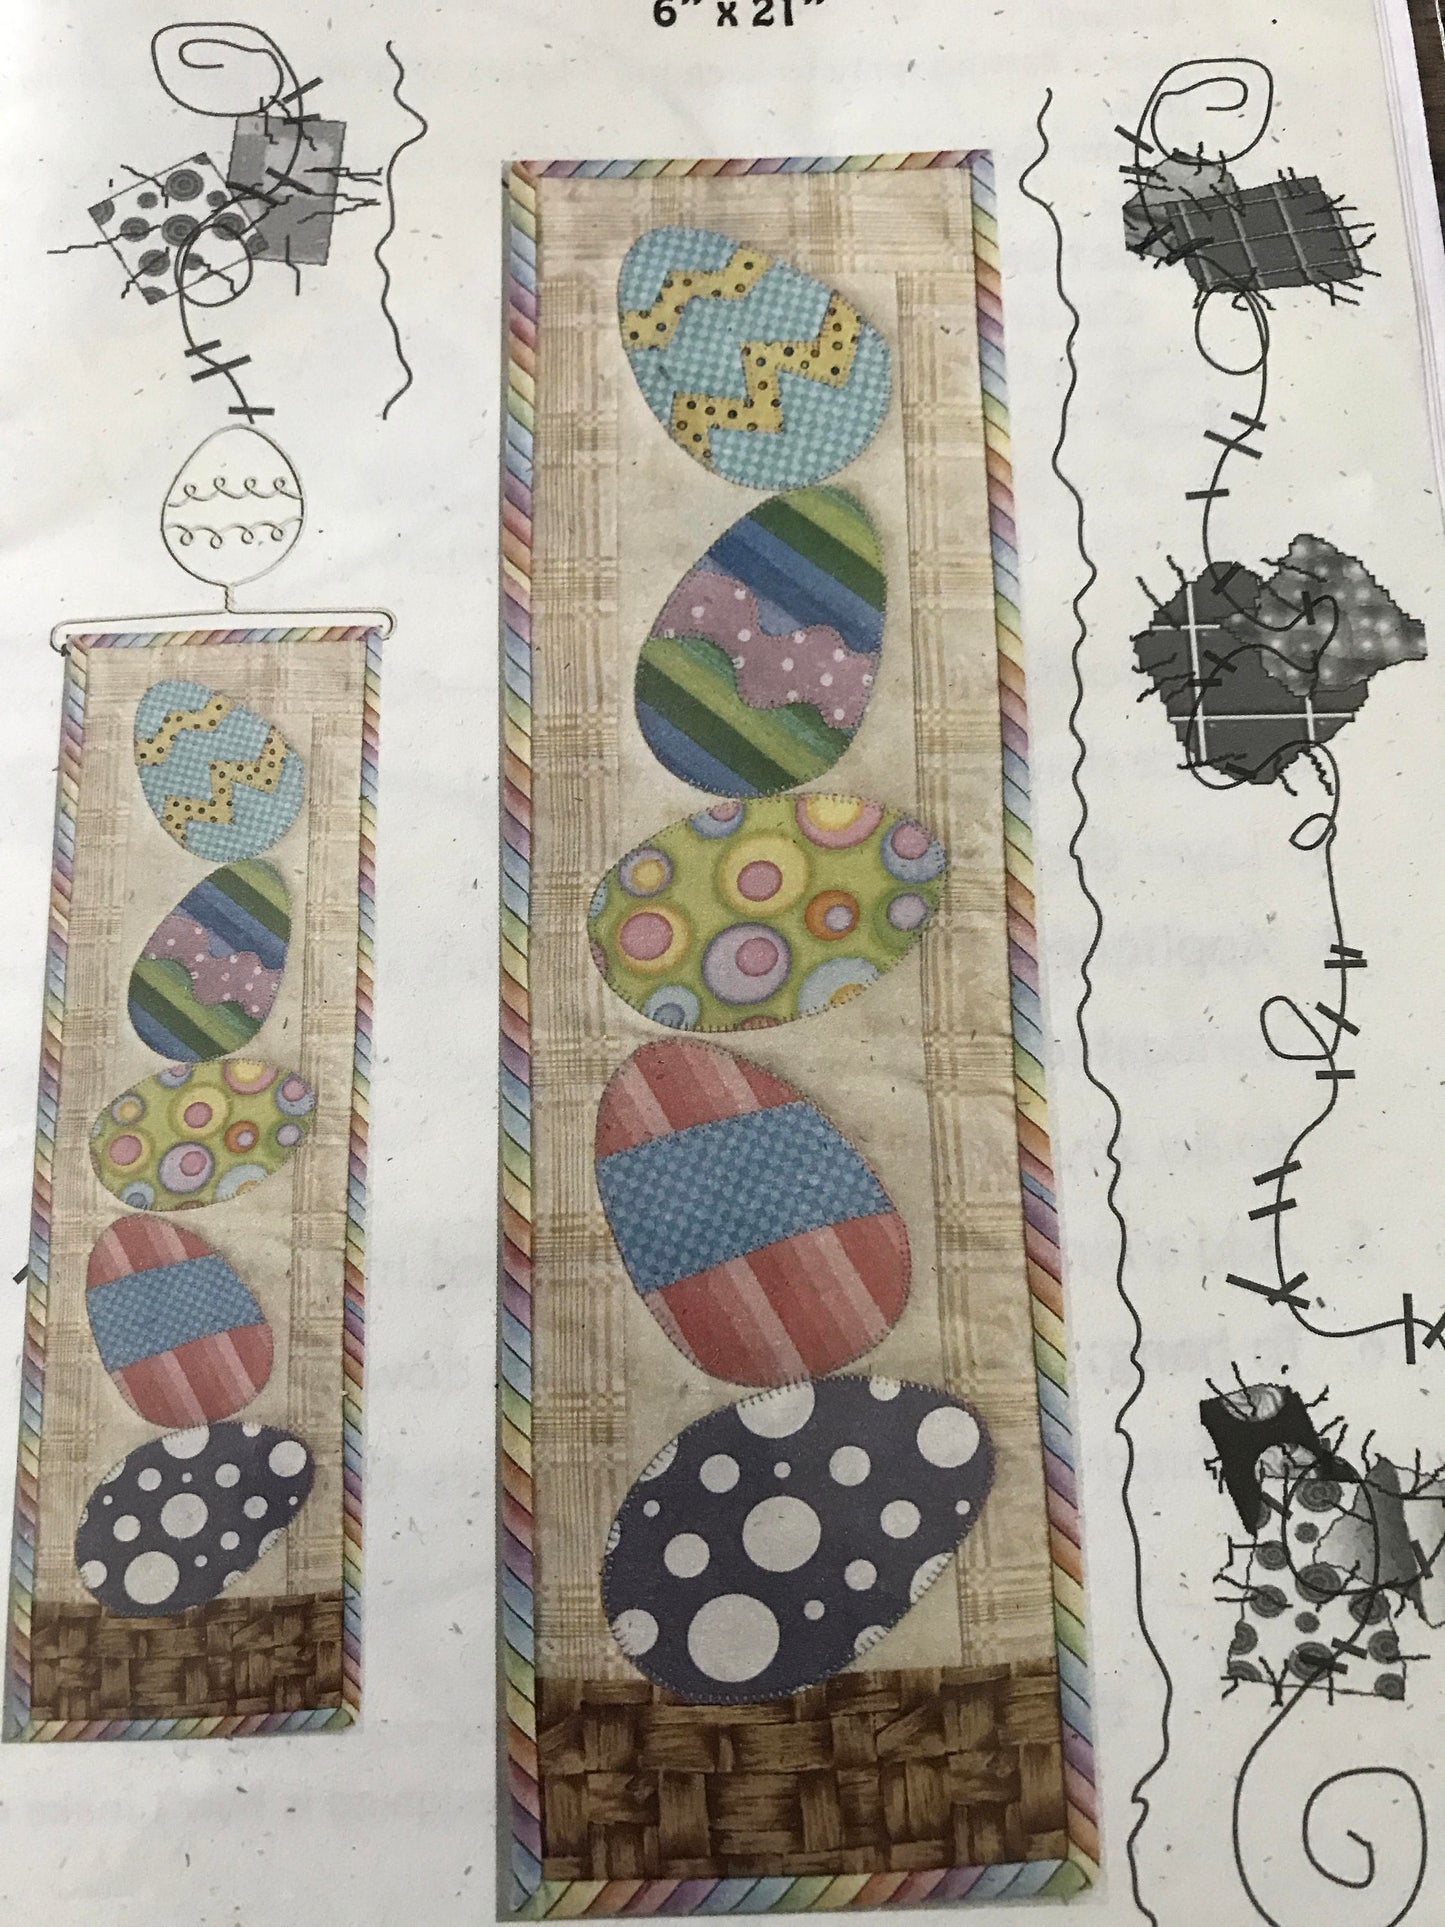 Easter Egg quilted banner, 6' x 21"